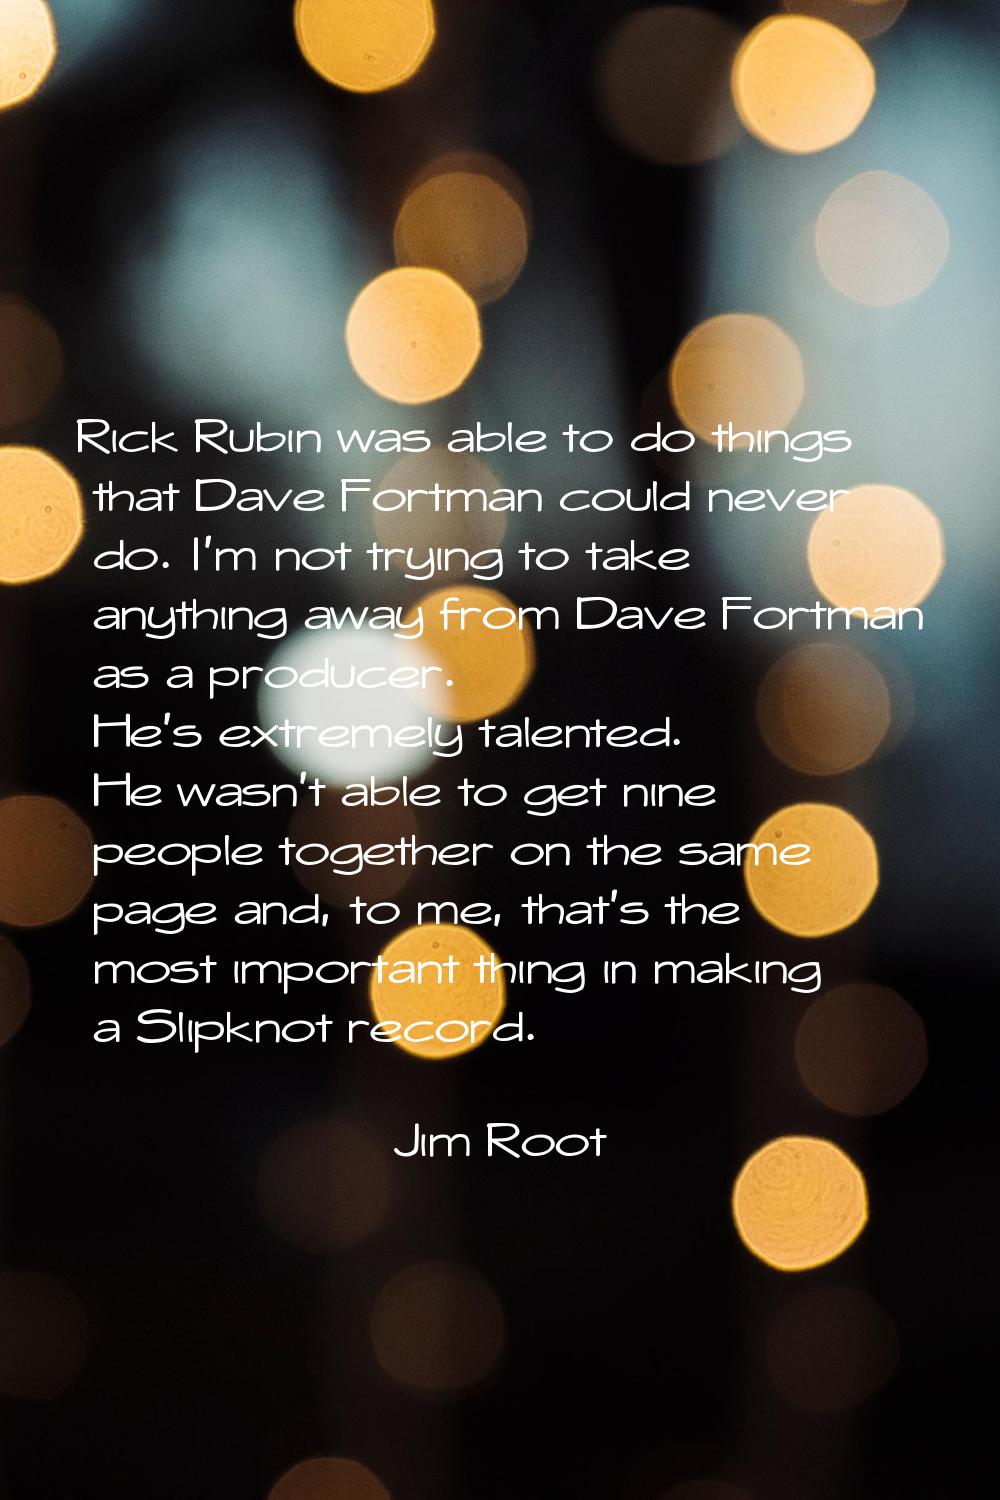 Rick Rubin was able to do things that Dave Fortman could never do. I'm not trying to take anything 